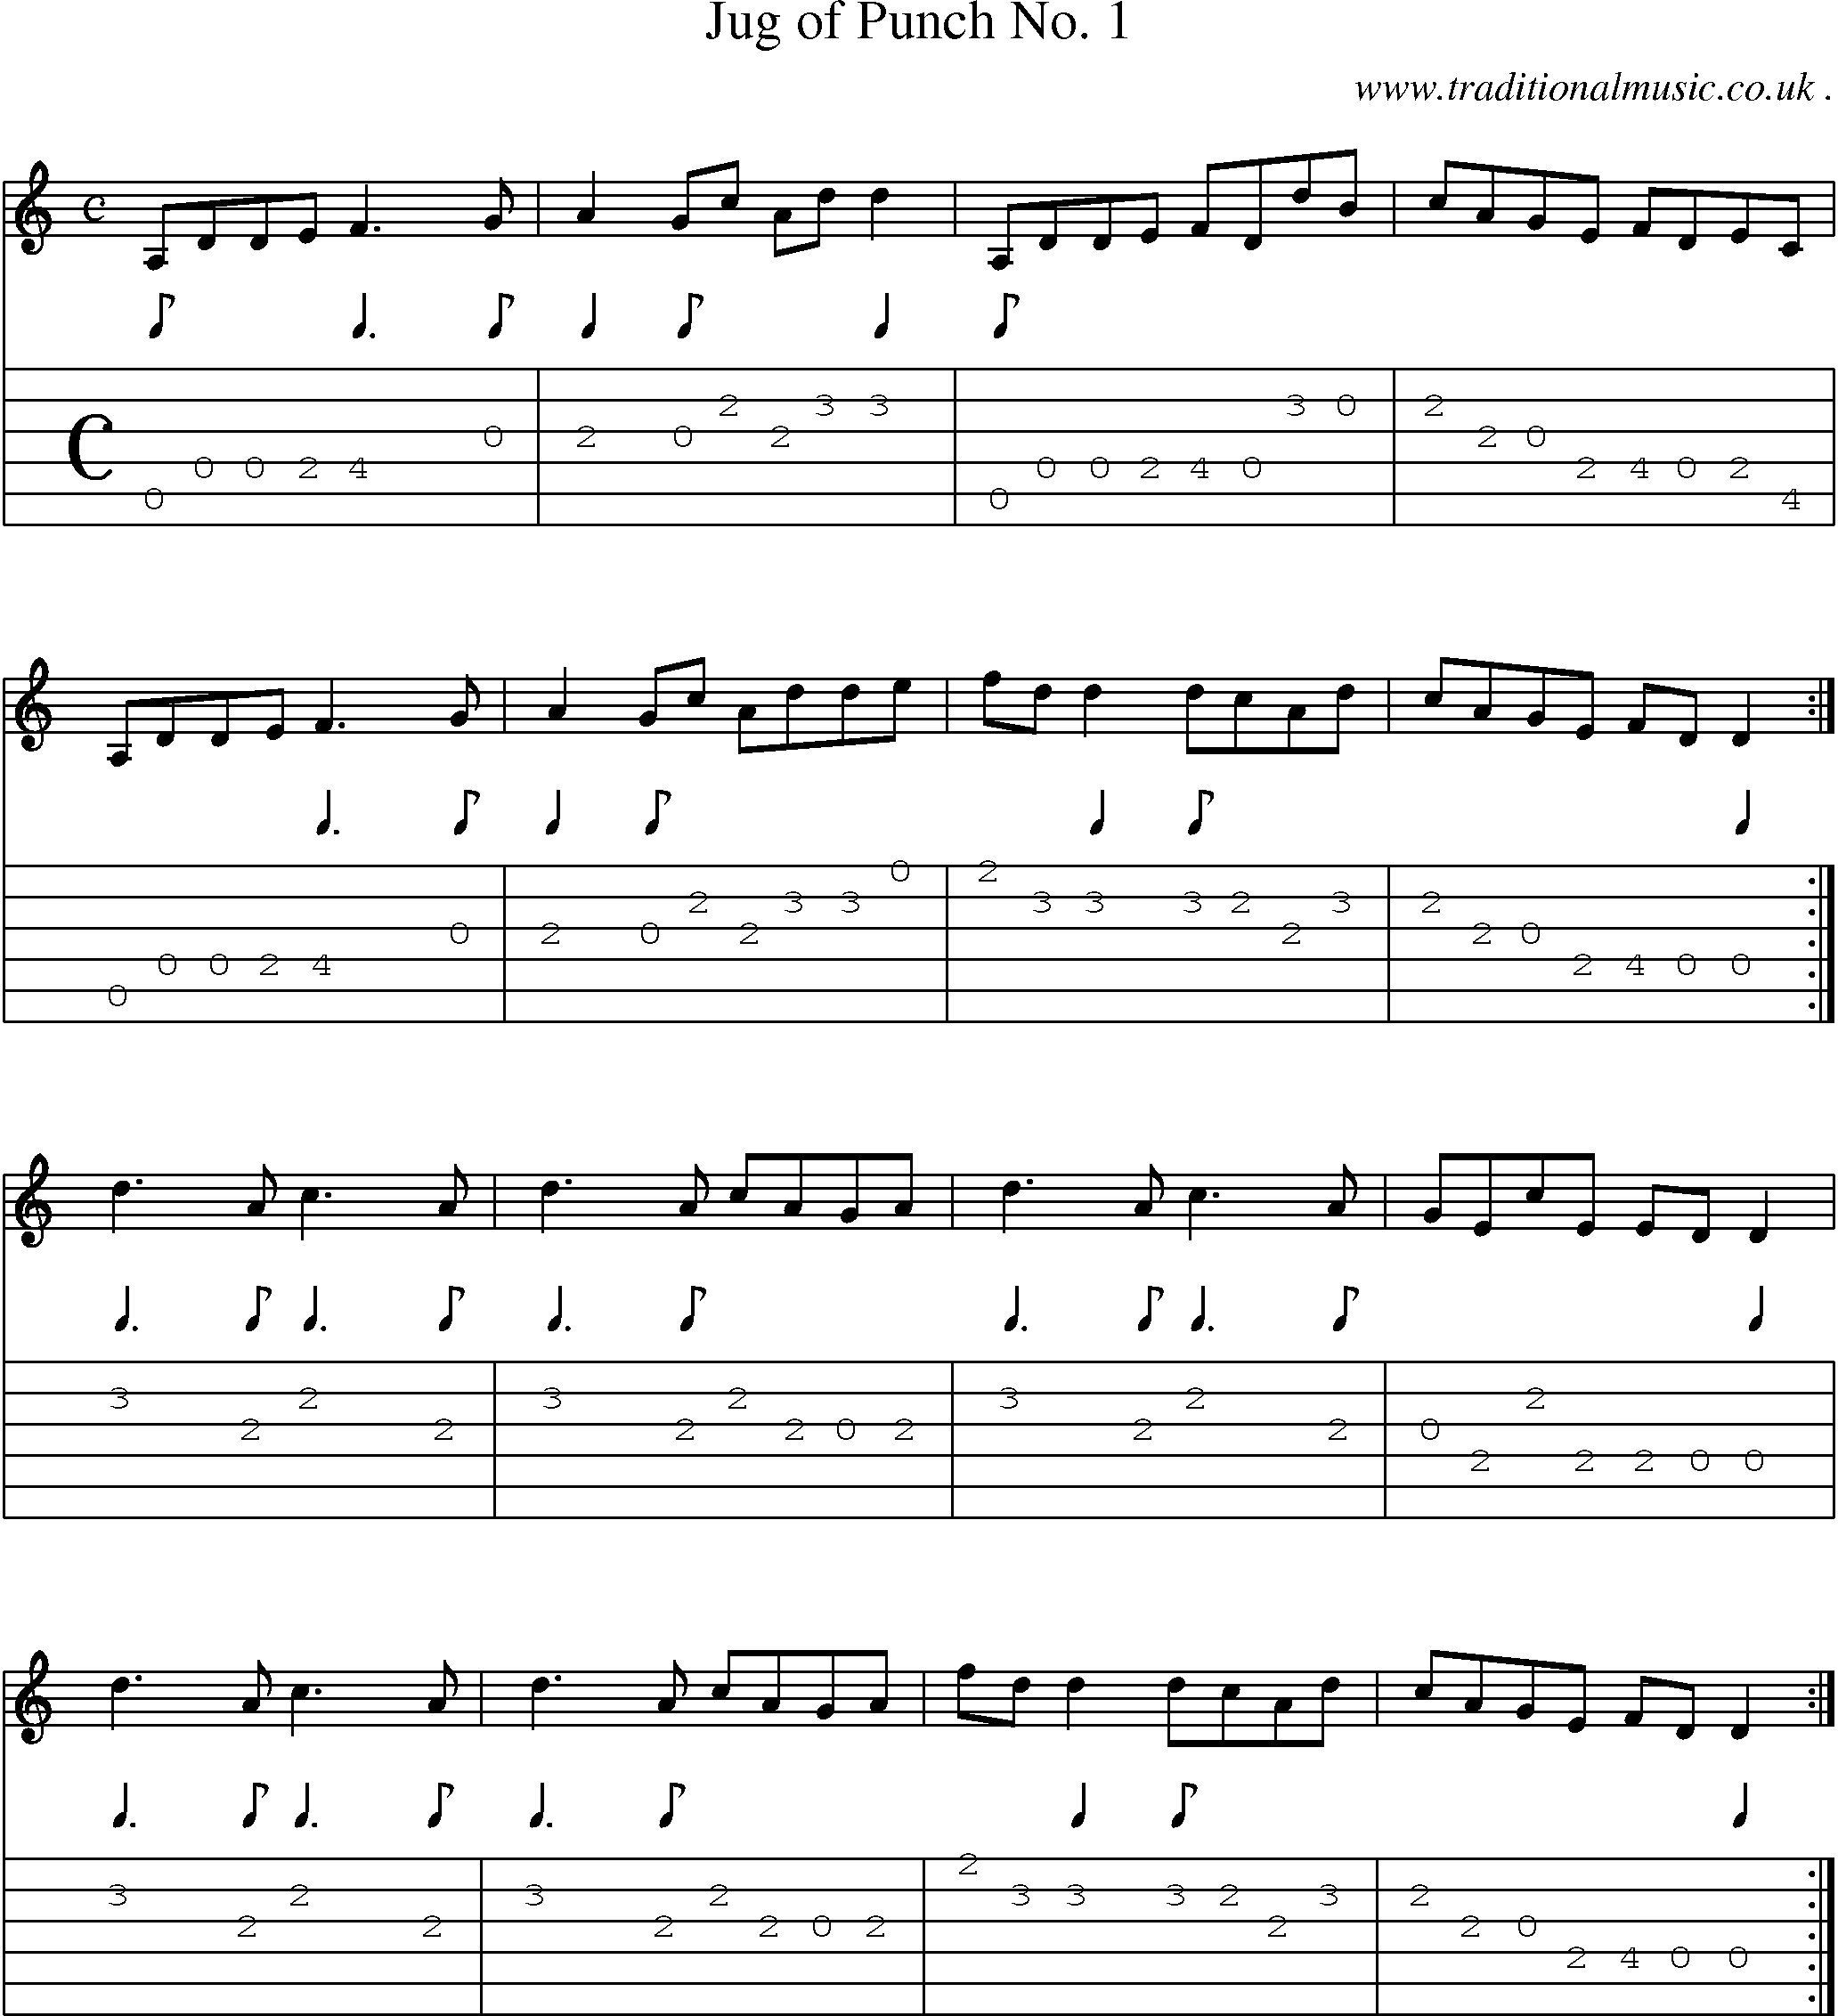 Sheet-Music and Guitar Tabs for Jug Of Punch No 1